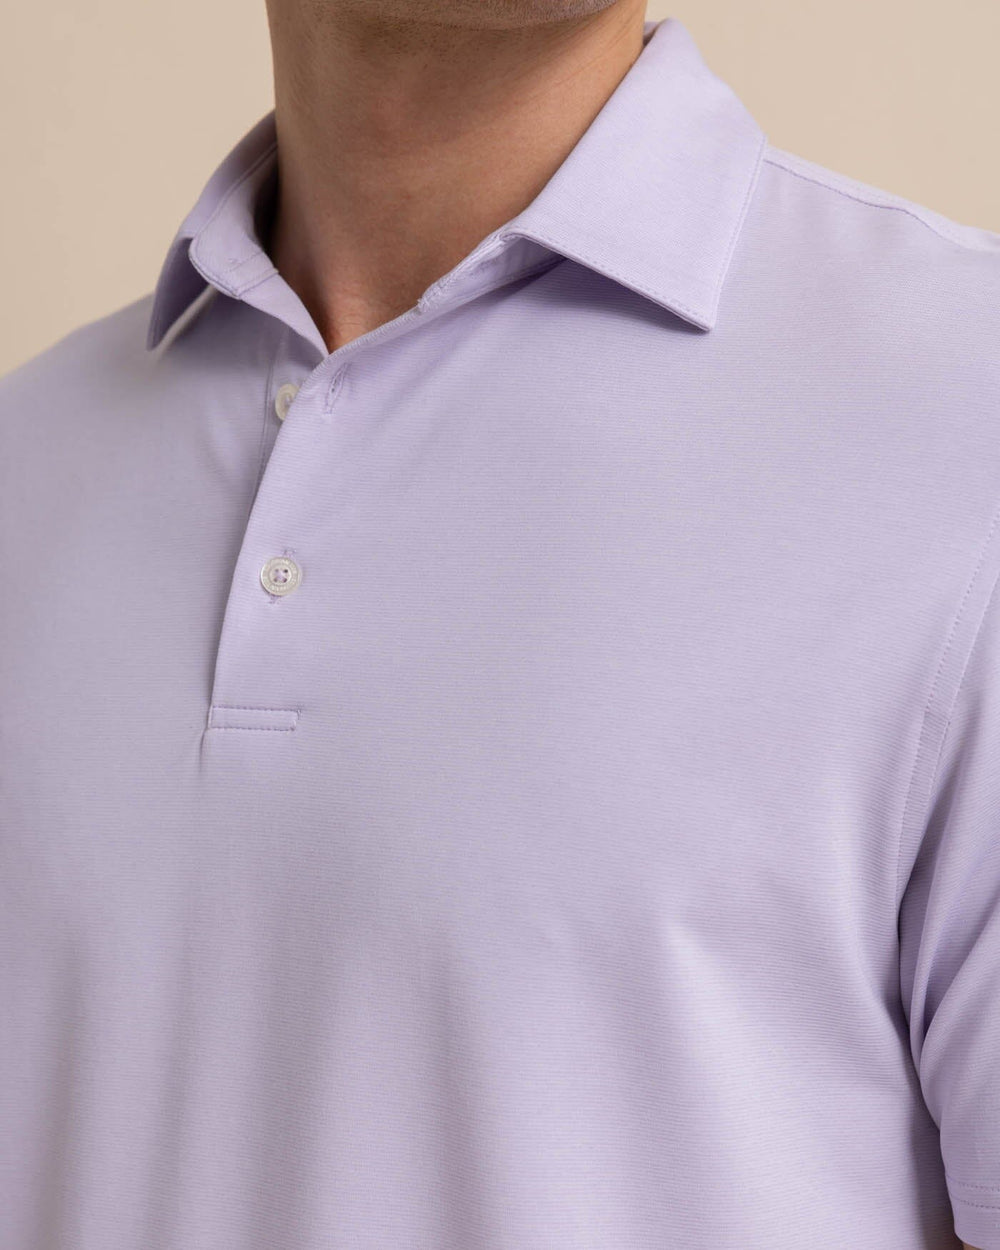 The detail view of the Southern Tide brrr eeze Heather Performance Polo Shirt by Southern Tide - Heather Orchid Petal